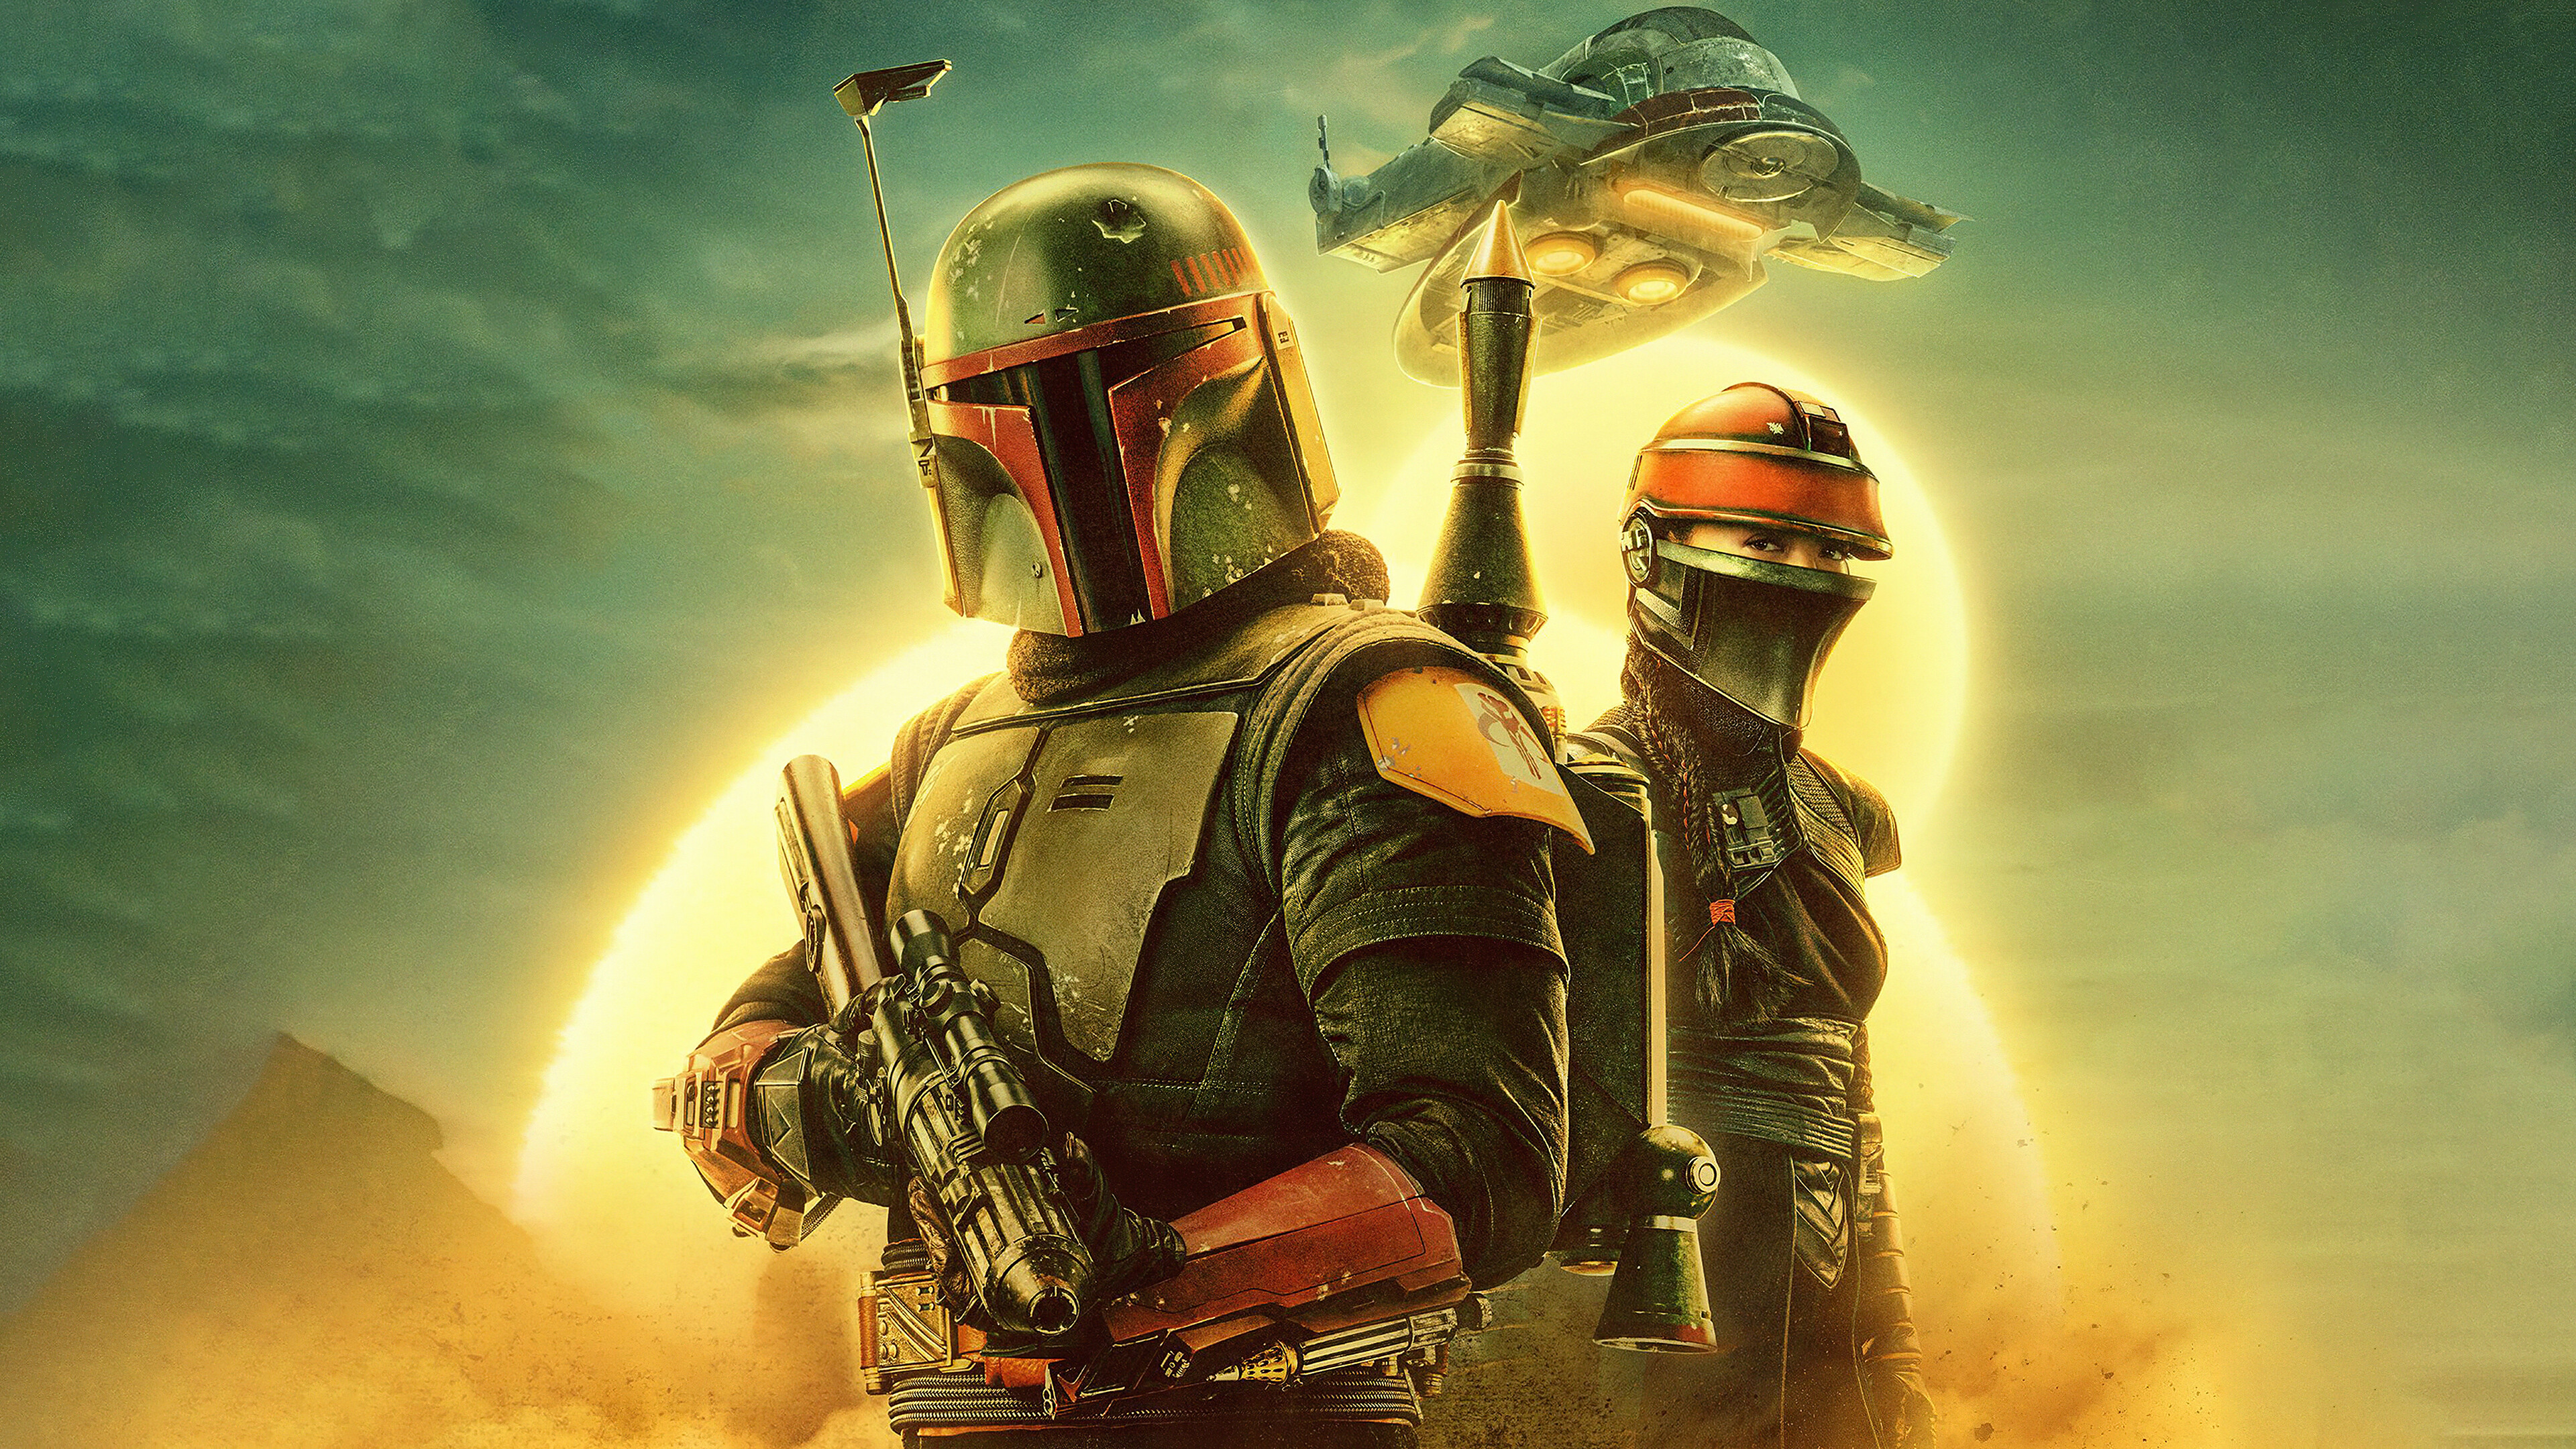 The Book of Boba Fett: An American space Western television series created by Jon Favreau. 3840x2160 4K Wallpaper.